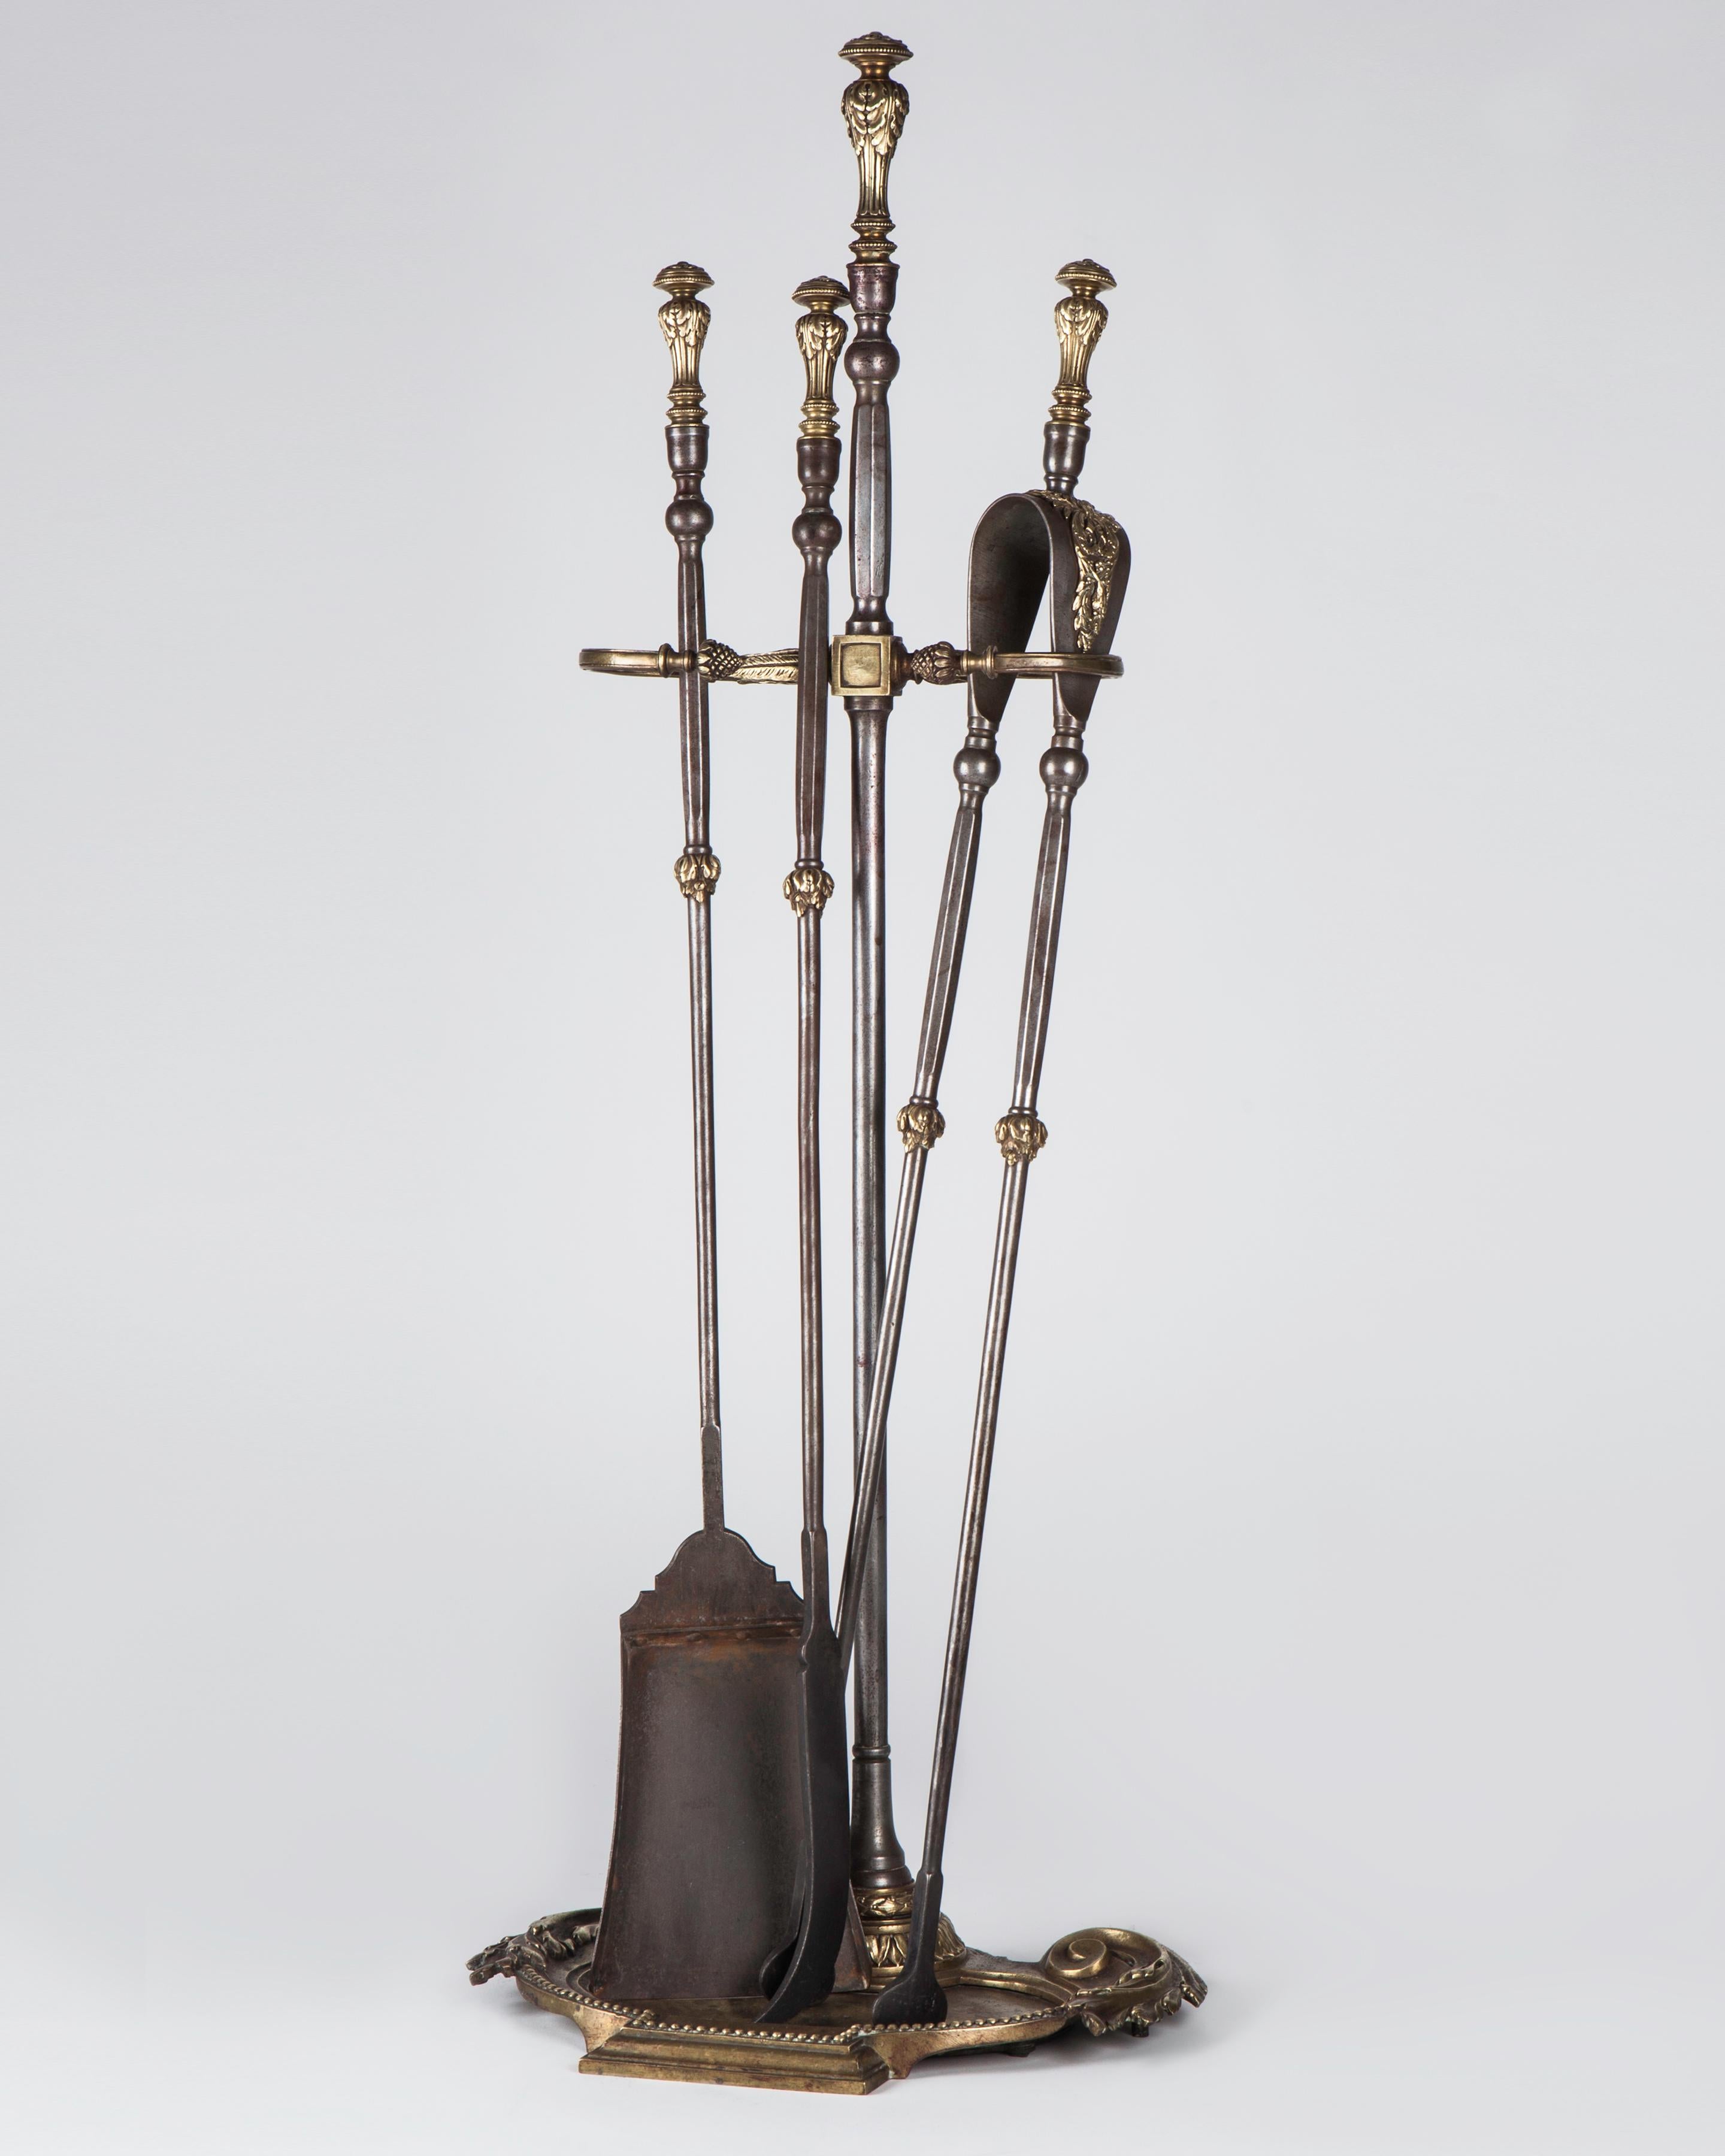 AFP0639

circa 1880
A set of antique fireplace tools and coordinating stand having finely chased cast brass details. In their original aged polished brass and steel finish.

Dimensions:
Overall: 34-5/8